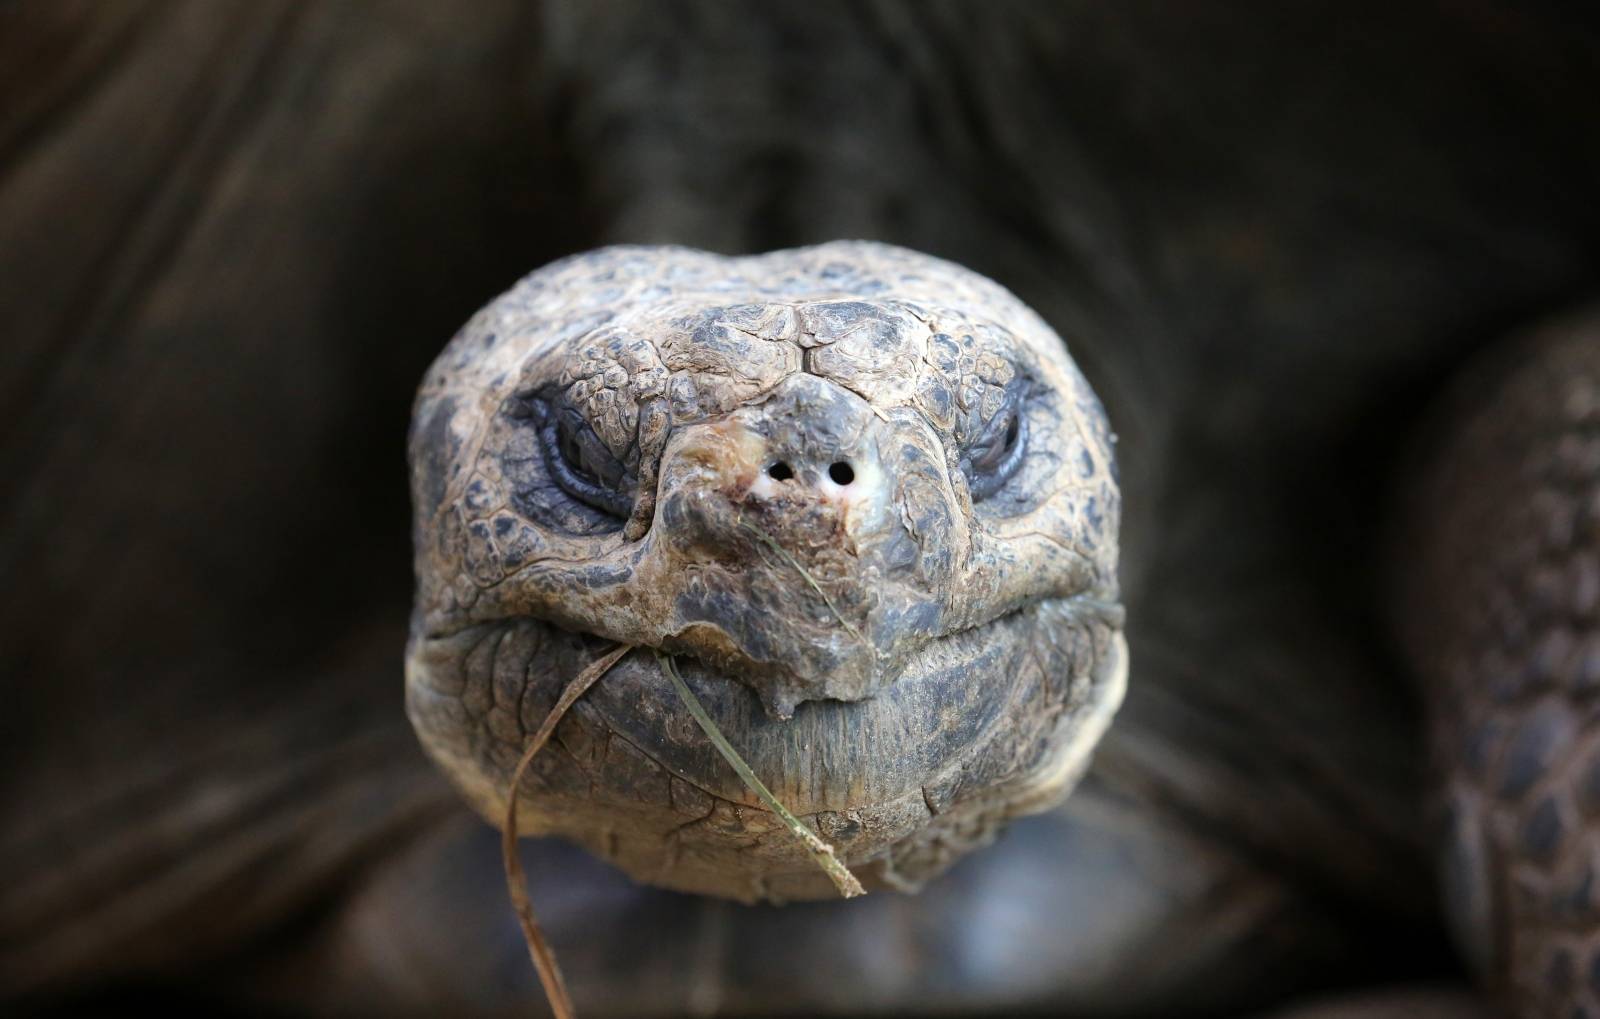 Galapagos giant tortoises are weighed